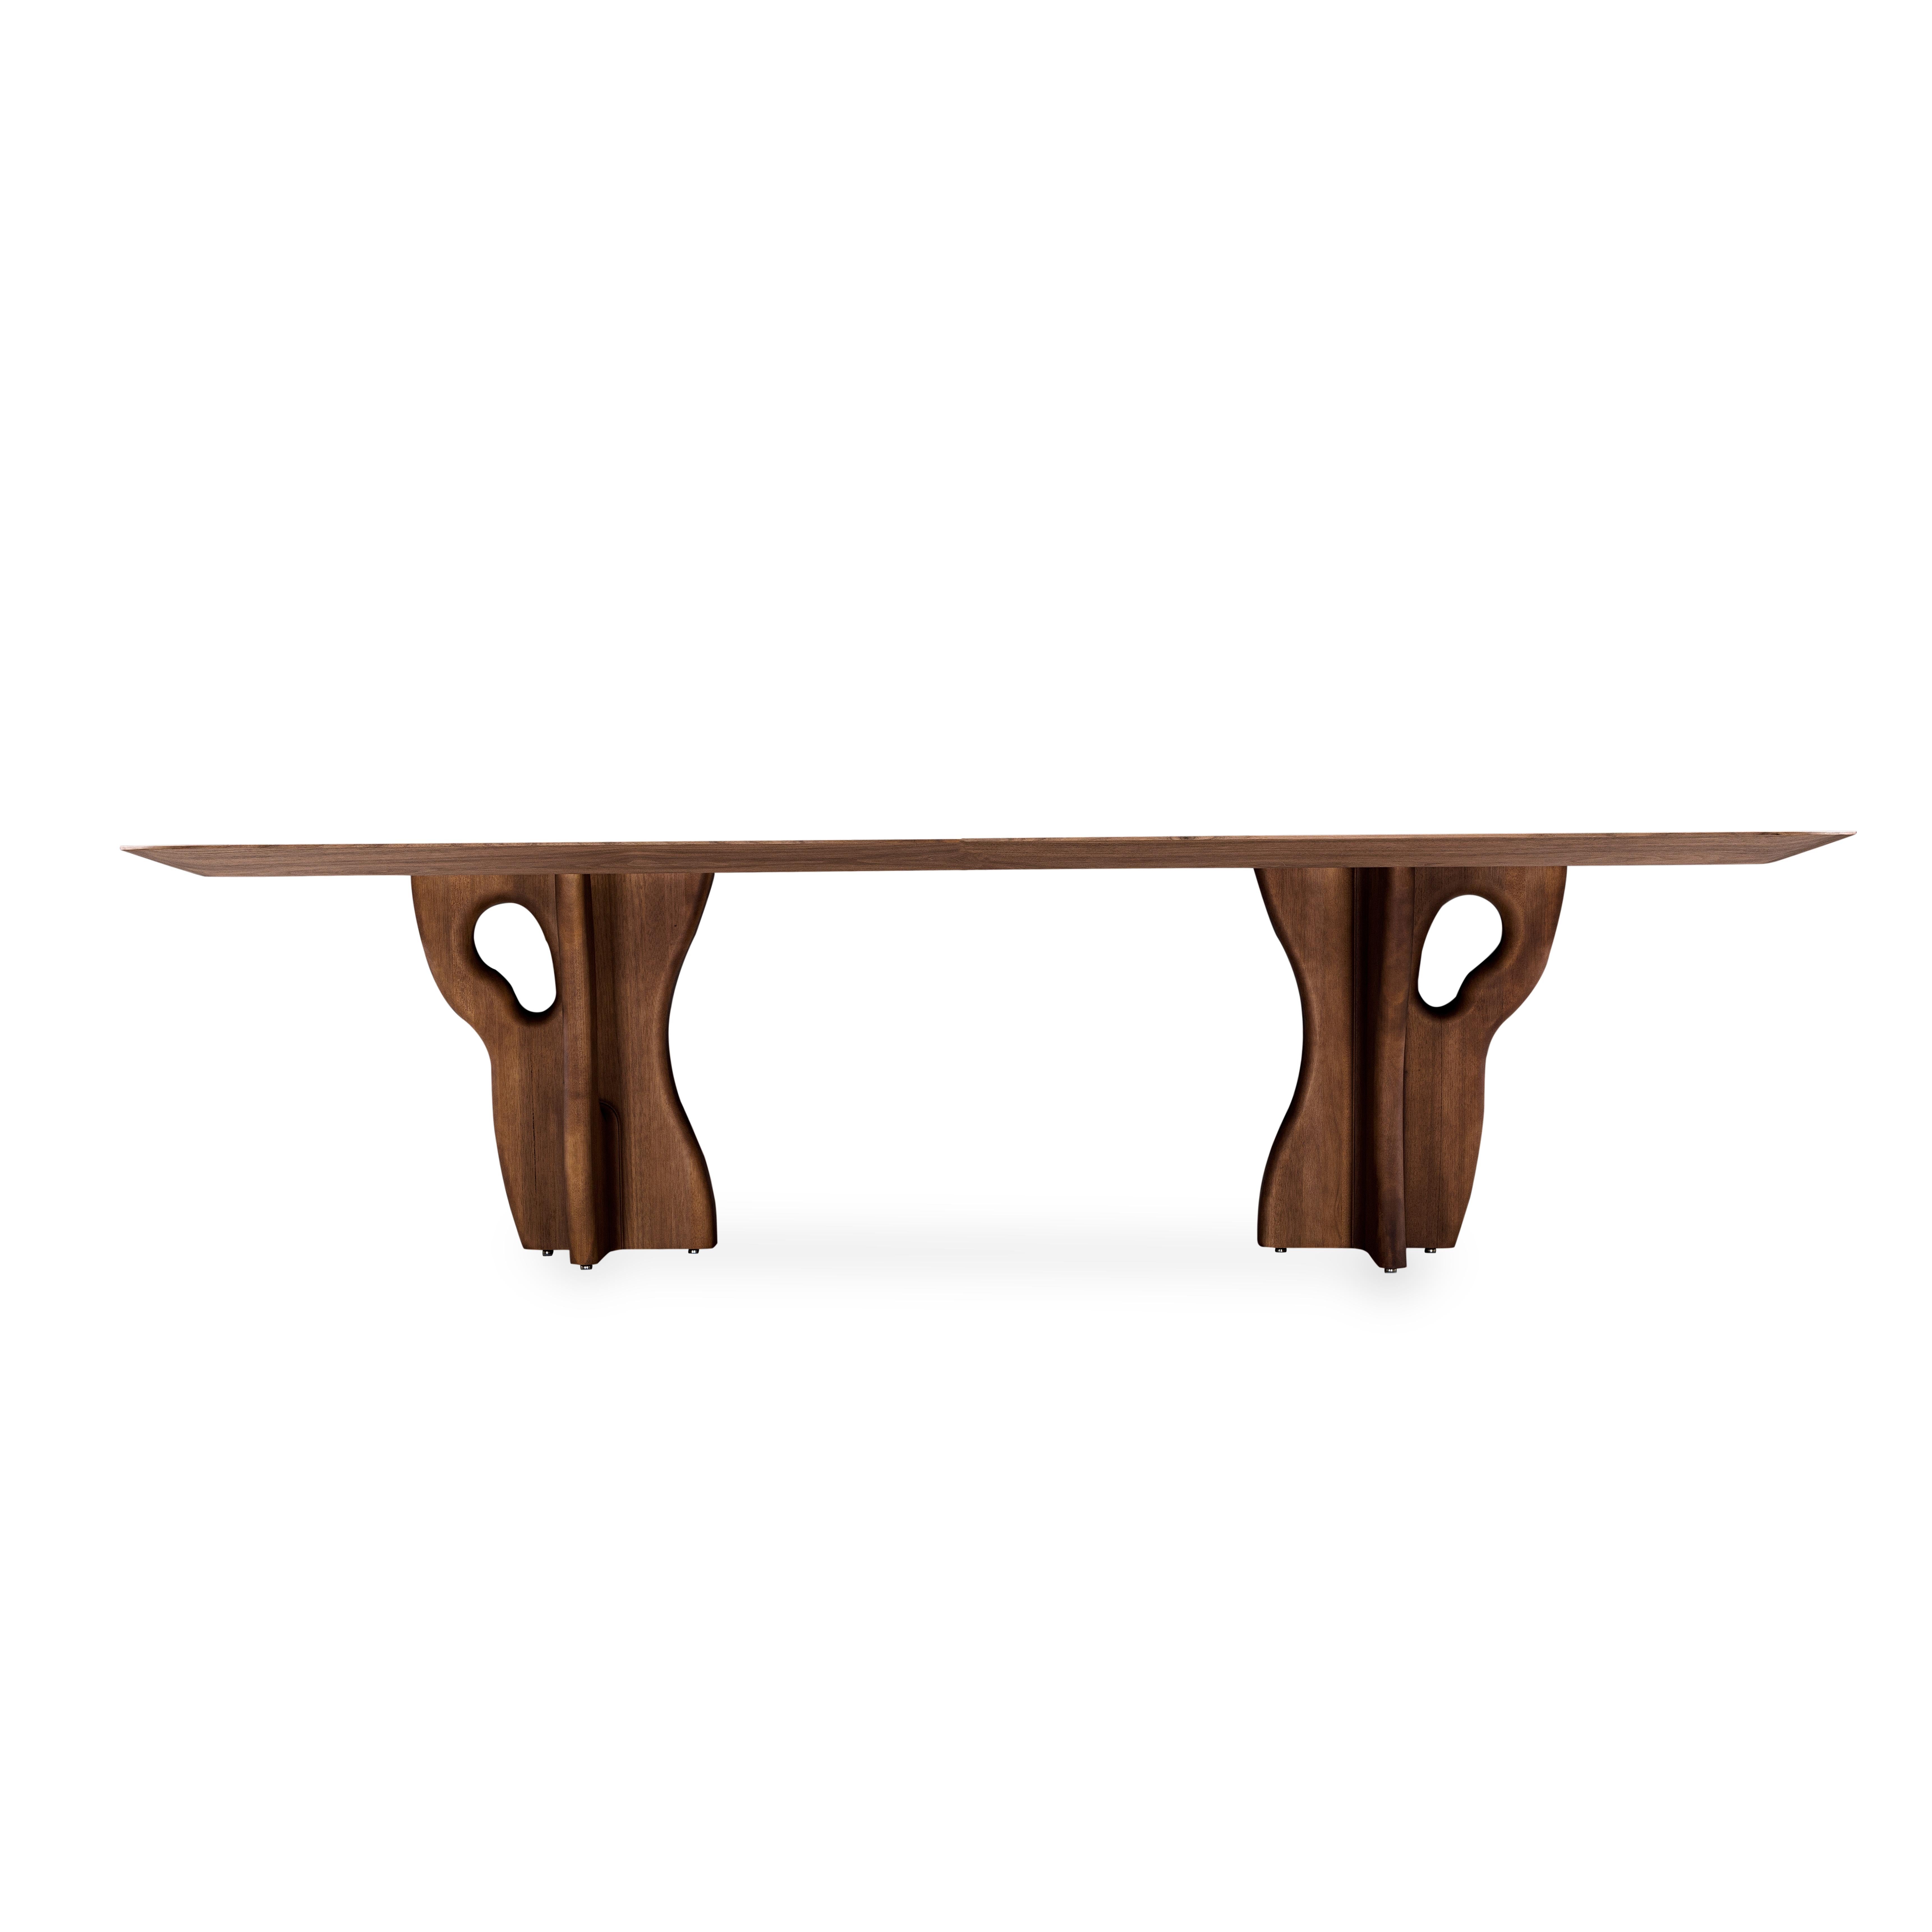 Contemporary Suma Dining Table with Walnut Veneered Top and Organic Solid Wood Legs 110'' For Sale